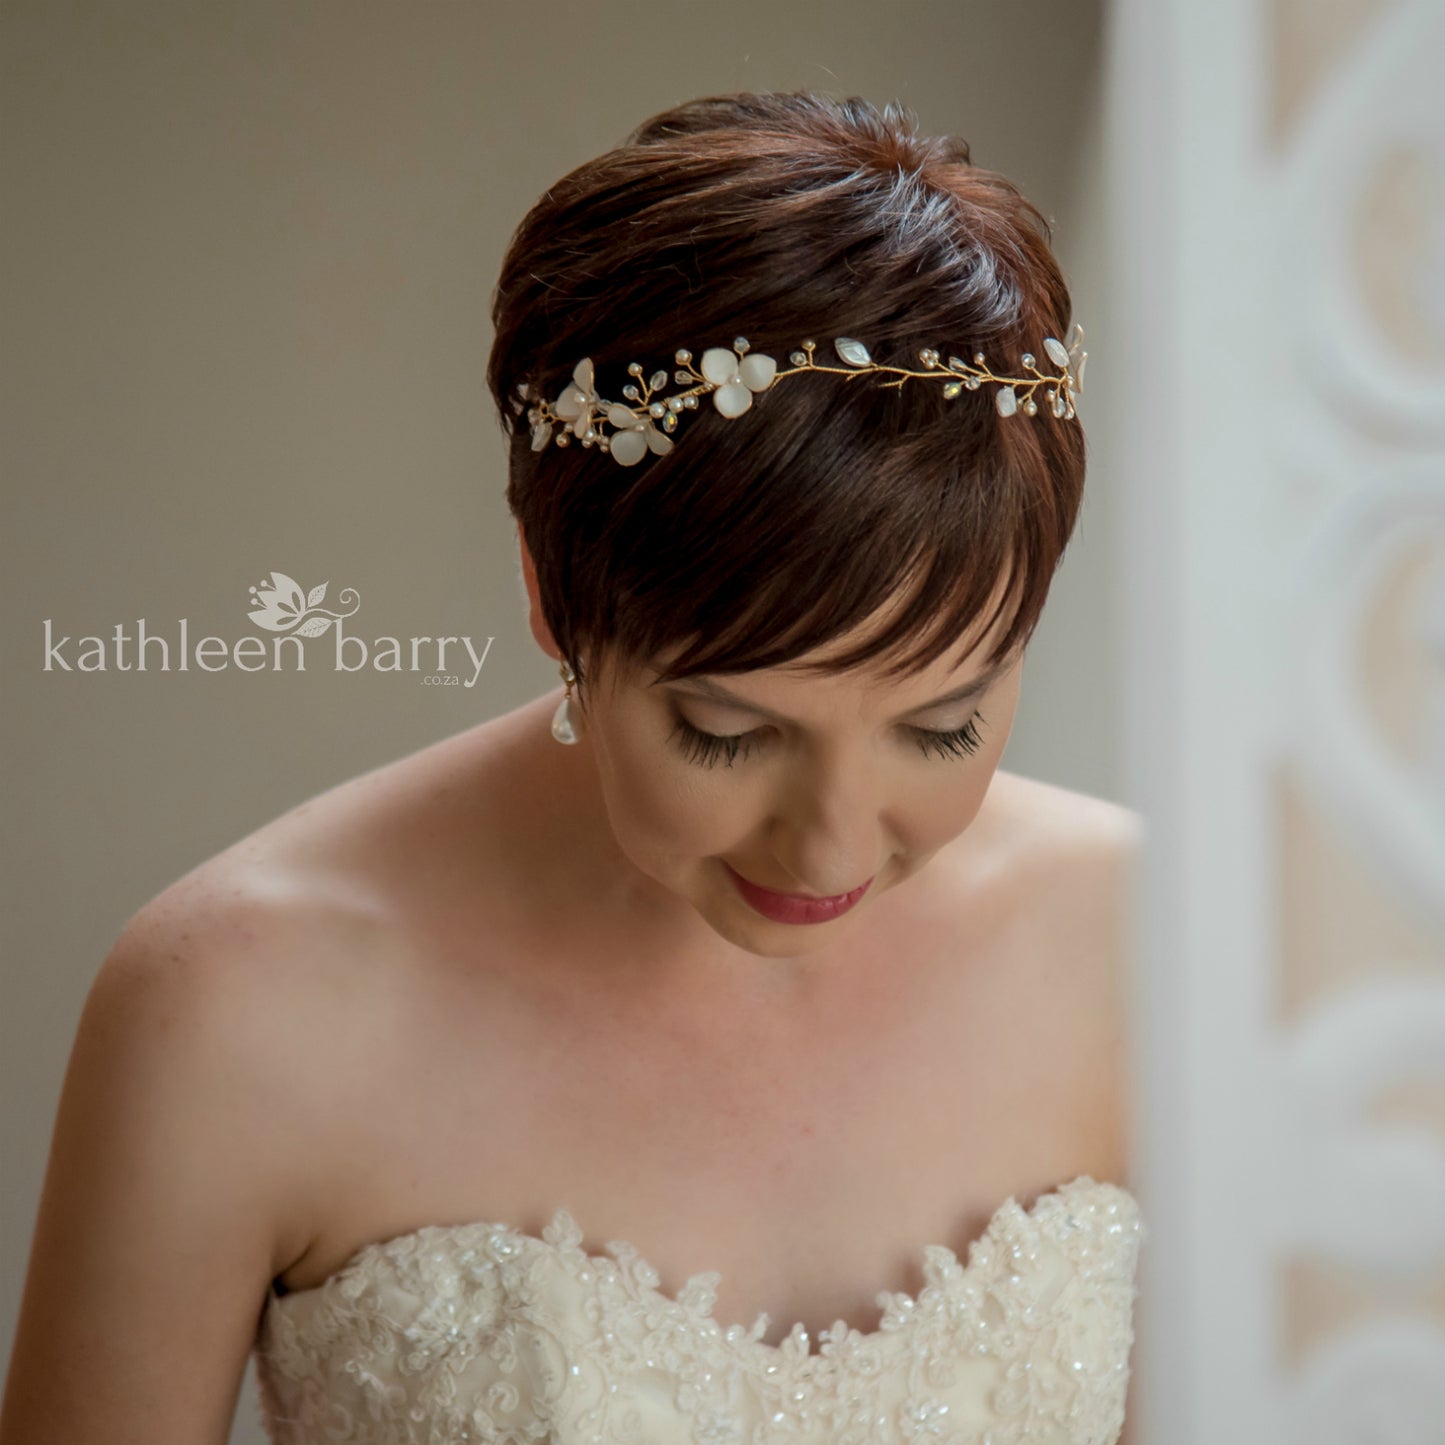 Tracy crystal pearl headband, delicate sculpted fabric flowers and glass leaves - colors available